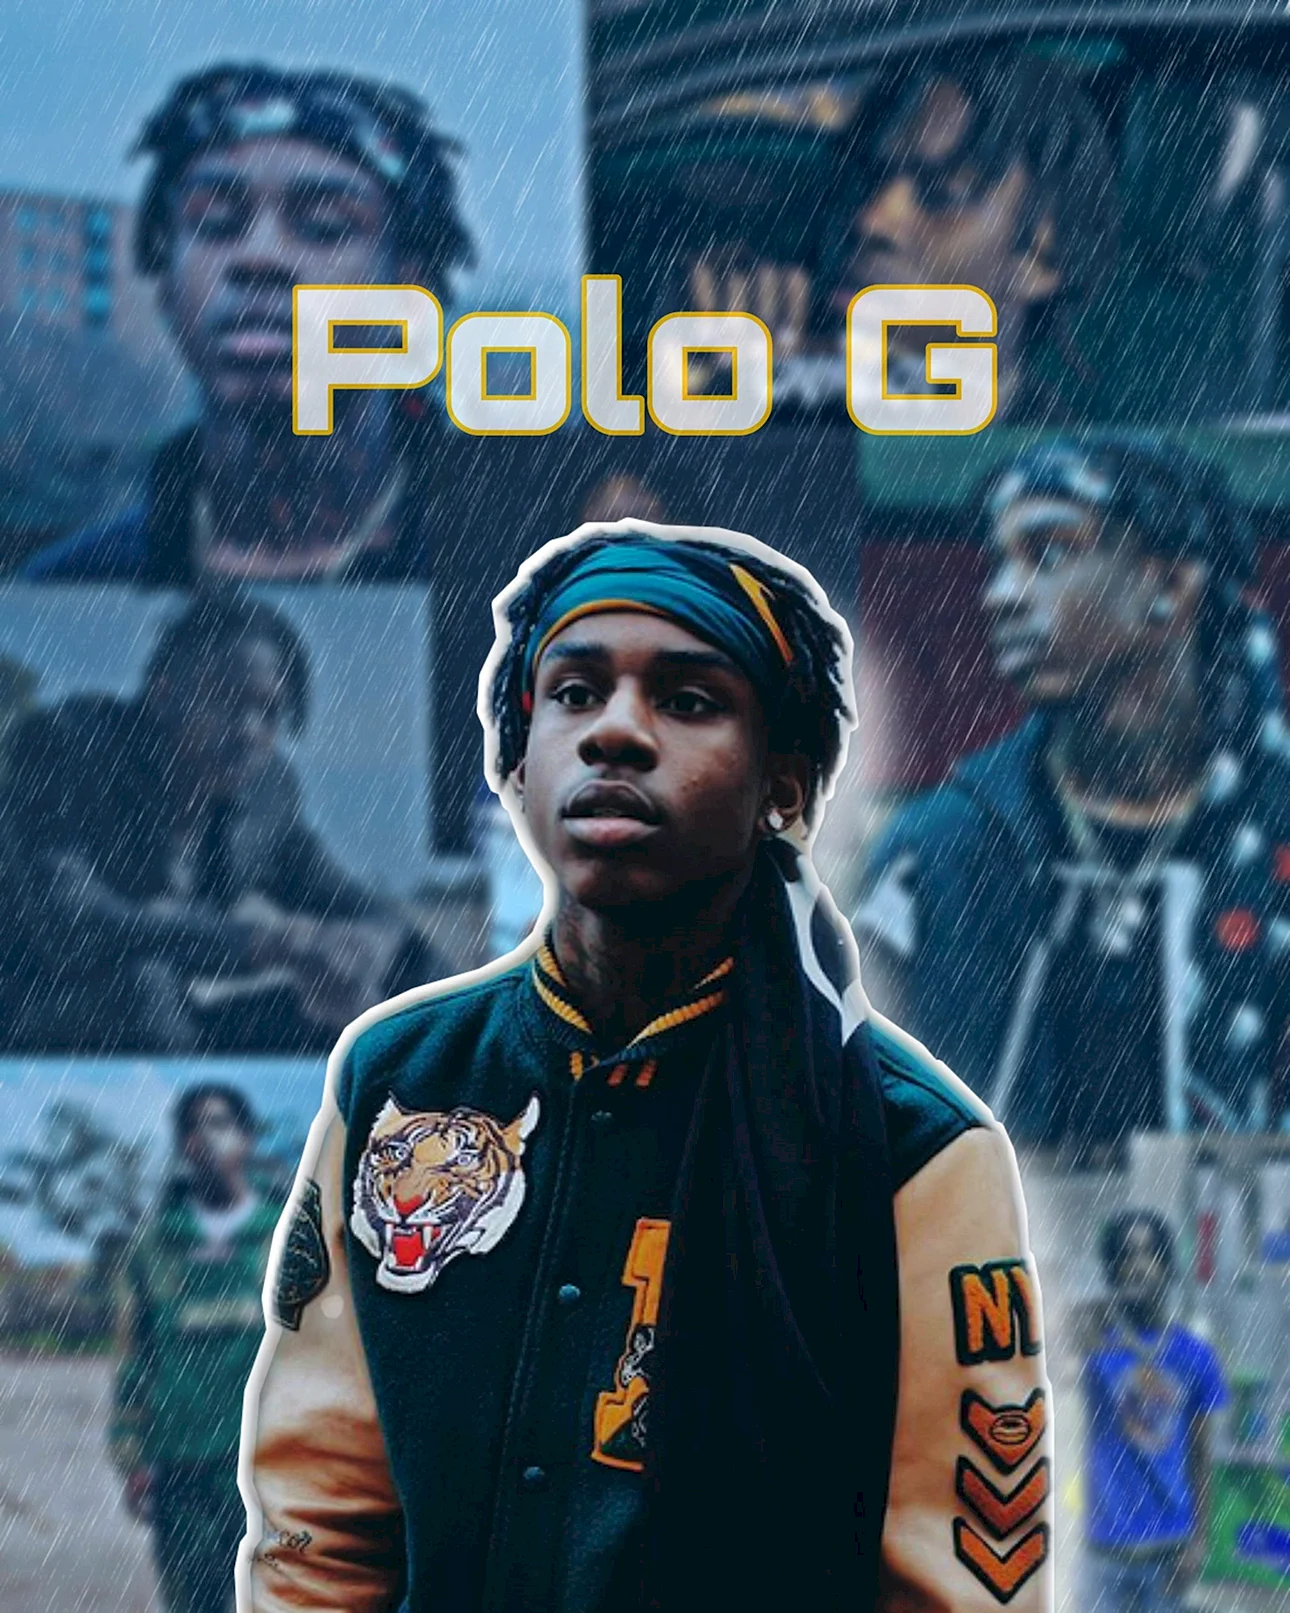 Polo G Wallpaper For iPhone